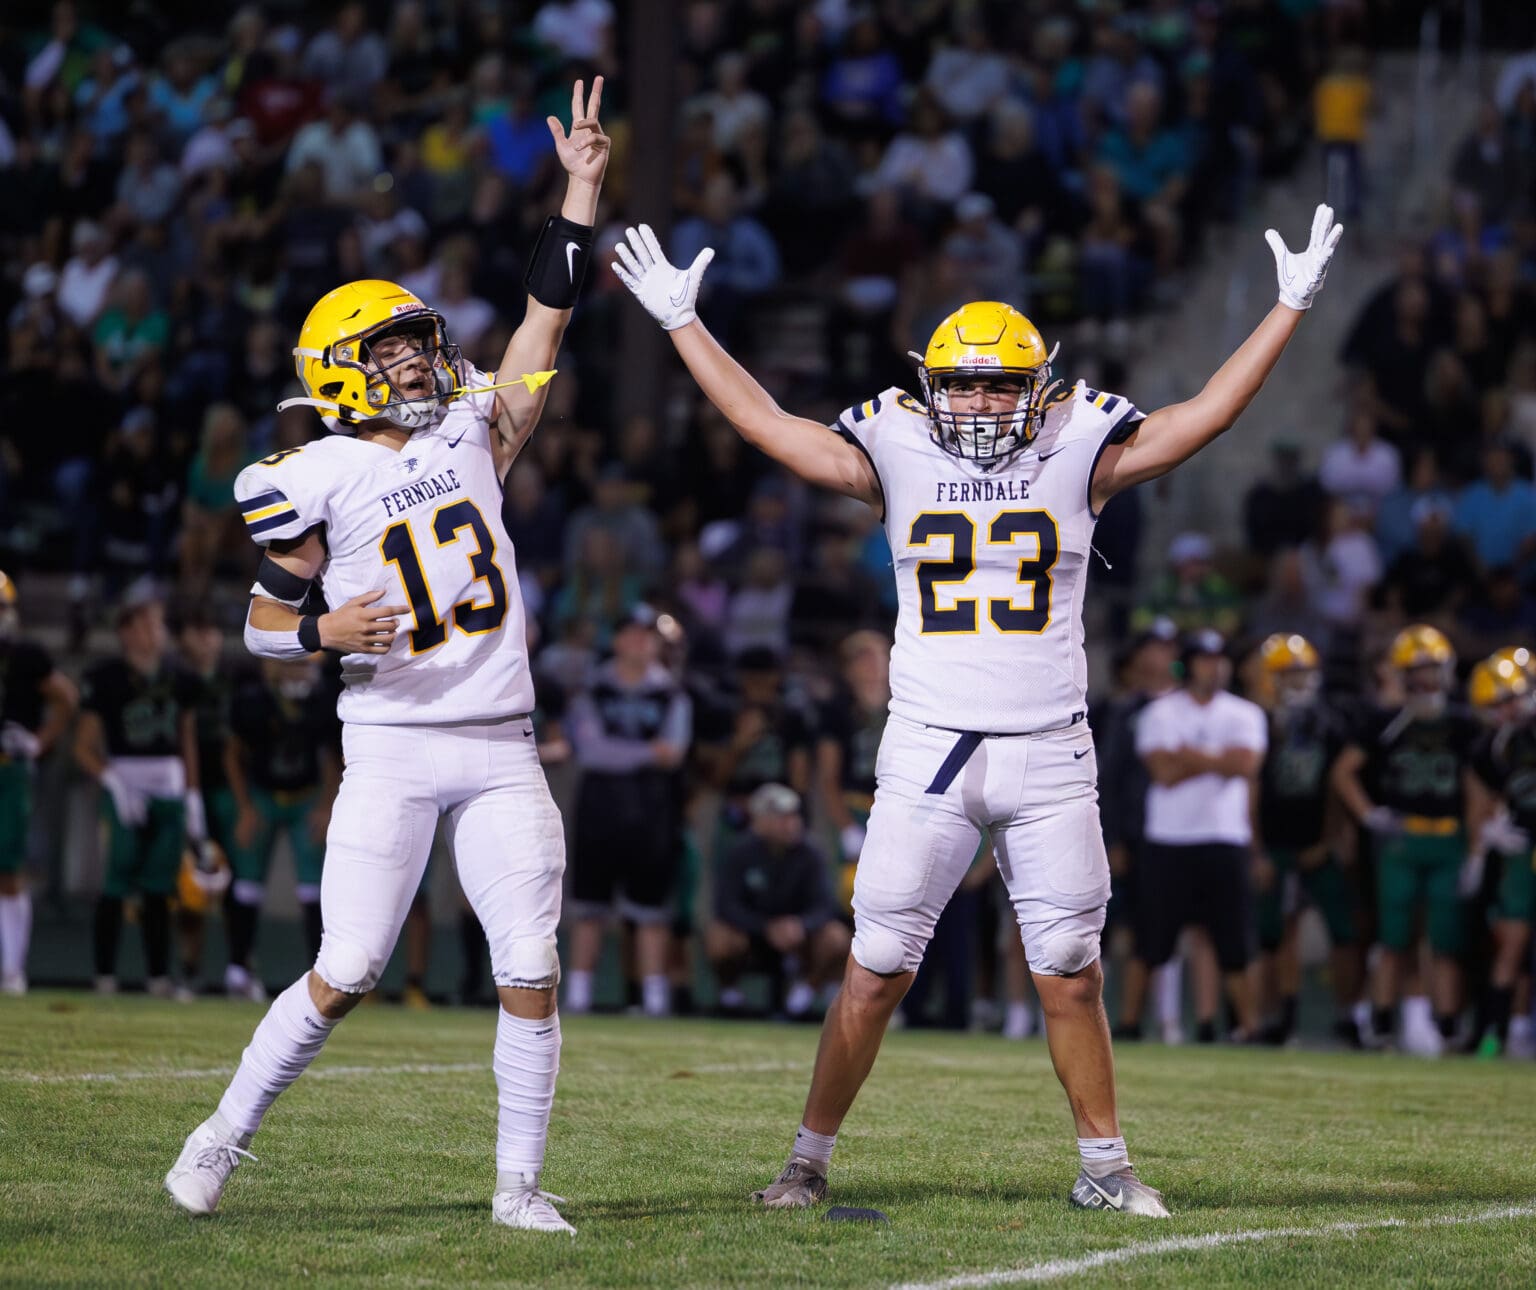 Ferndale kicker Phoenyx Finkbonner (23) celebrates his game-winning kick with teammate Bishop Ootsey with their arms stretched upwards.